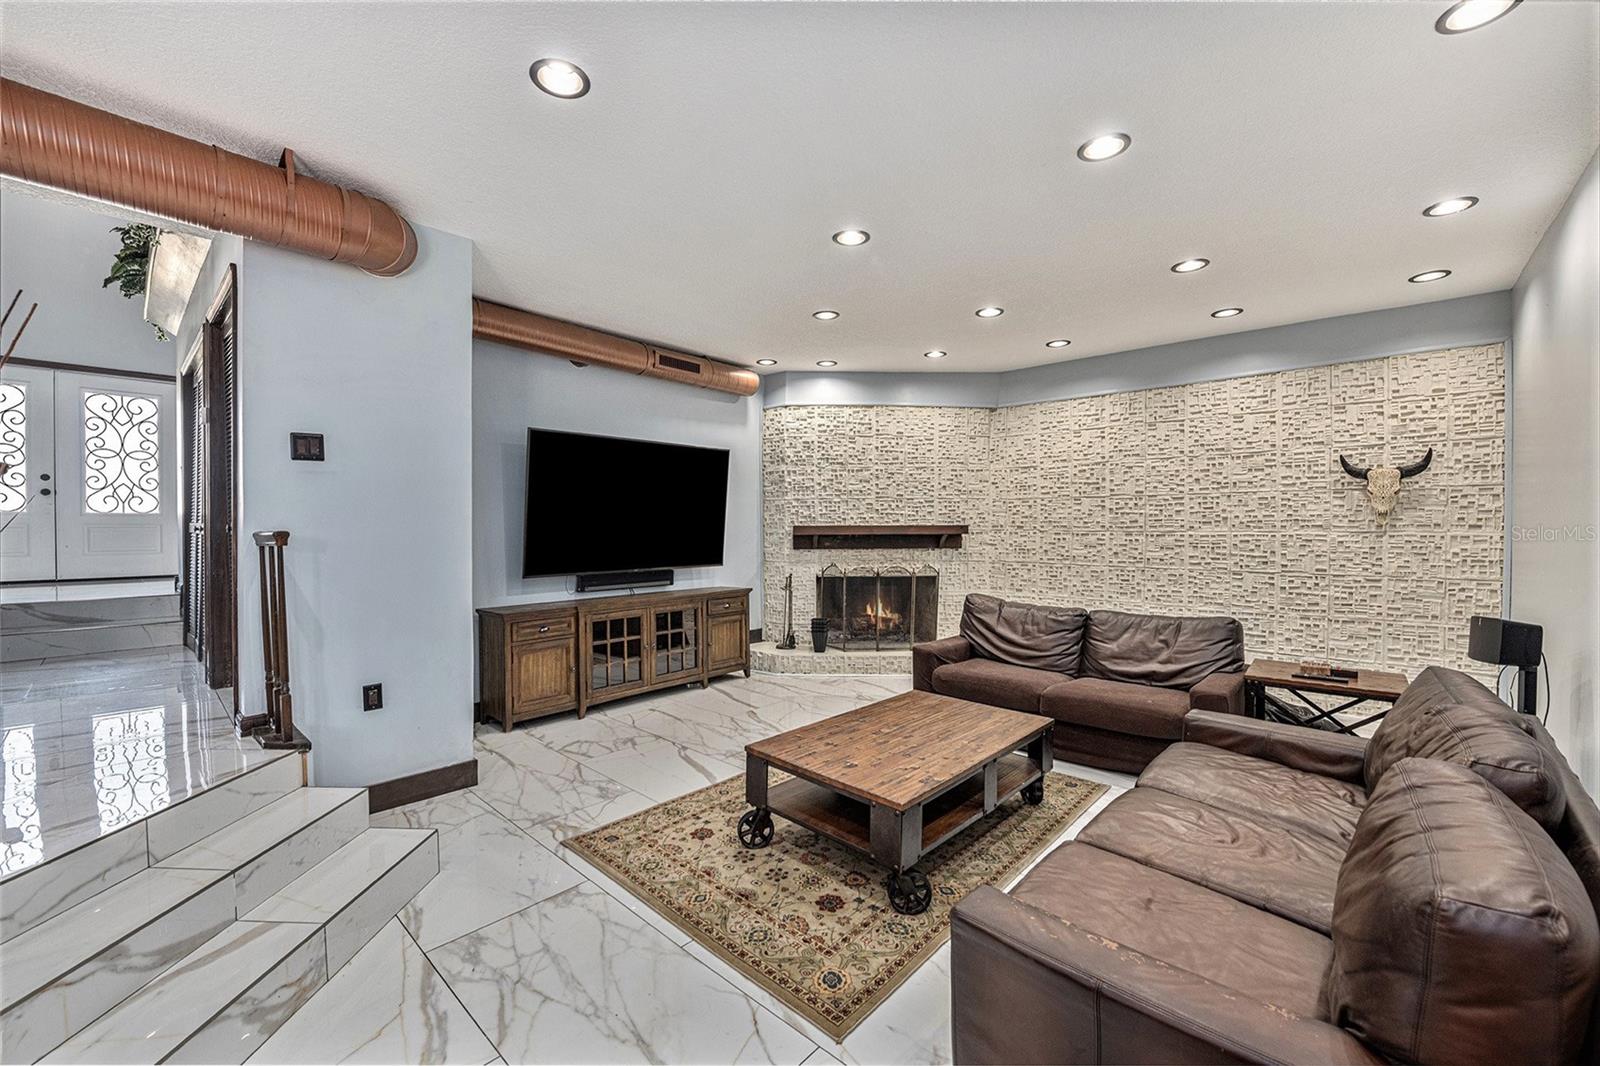 Family room with stone accent wall and fireplace